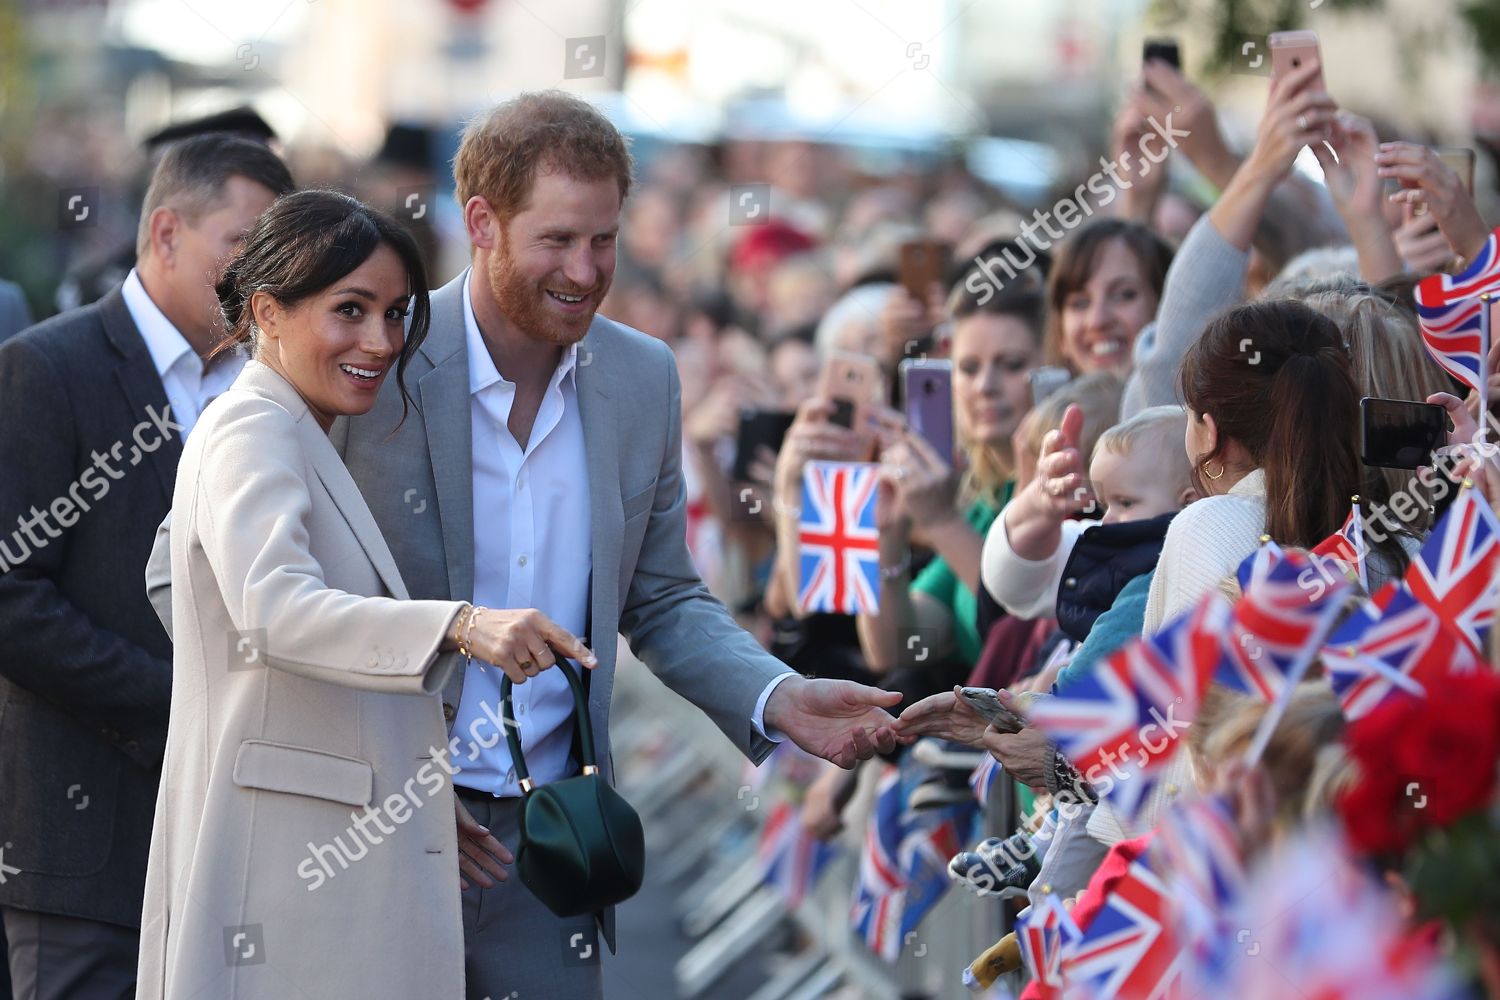 prince-harry-and-meghan-duchess-of-sussex-visit-to-sussex-uk-shutterstock-editorial-9912829o.jpg